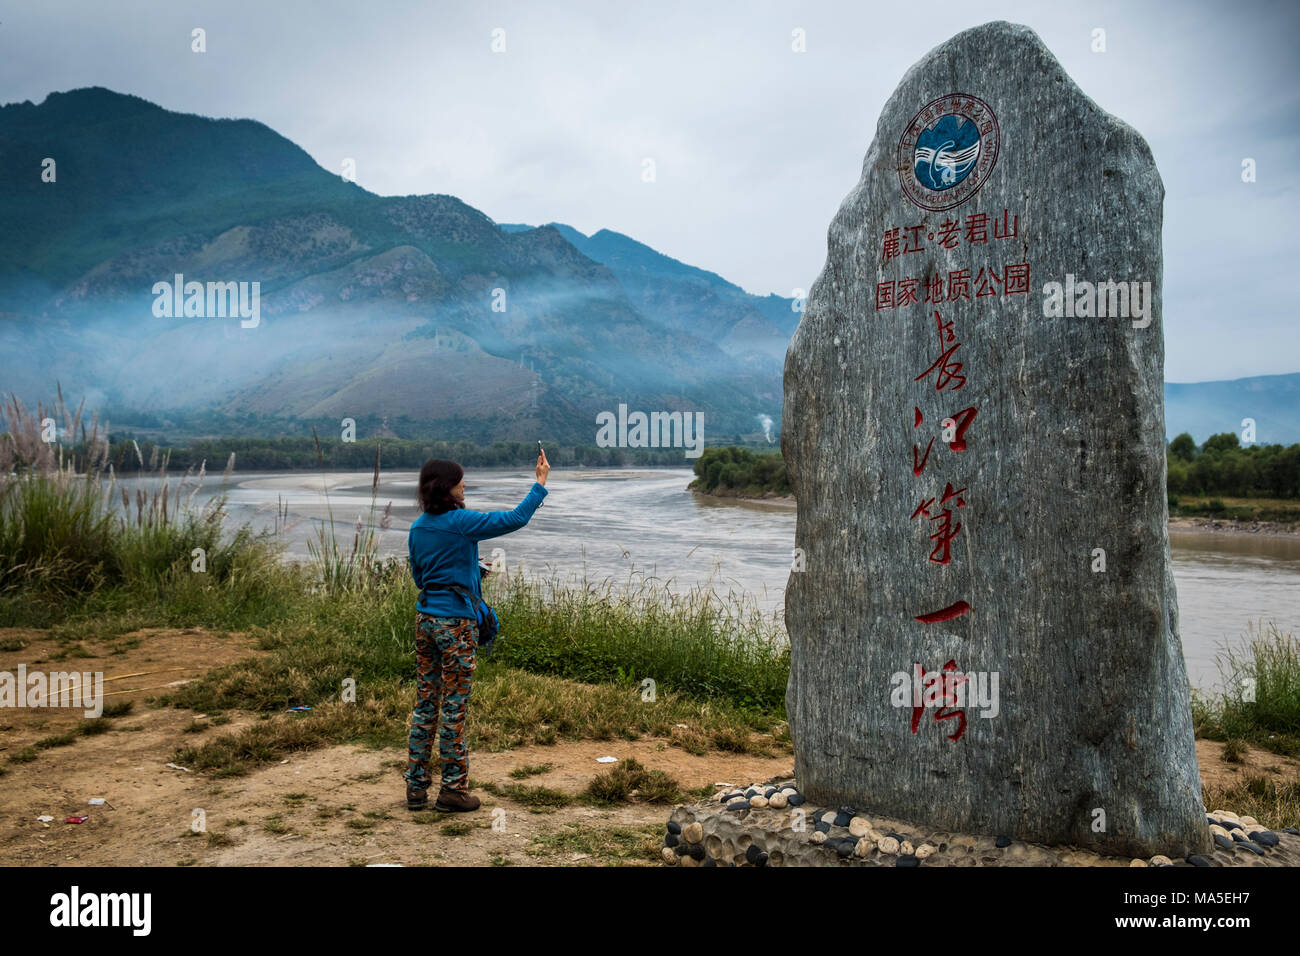 Tourist at First Bend of the Yangtze River at Shigu, Lijiang, Yunnan Province, China, Asia, Asian, East Asia, Far East Stock Photo